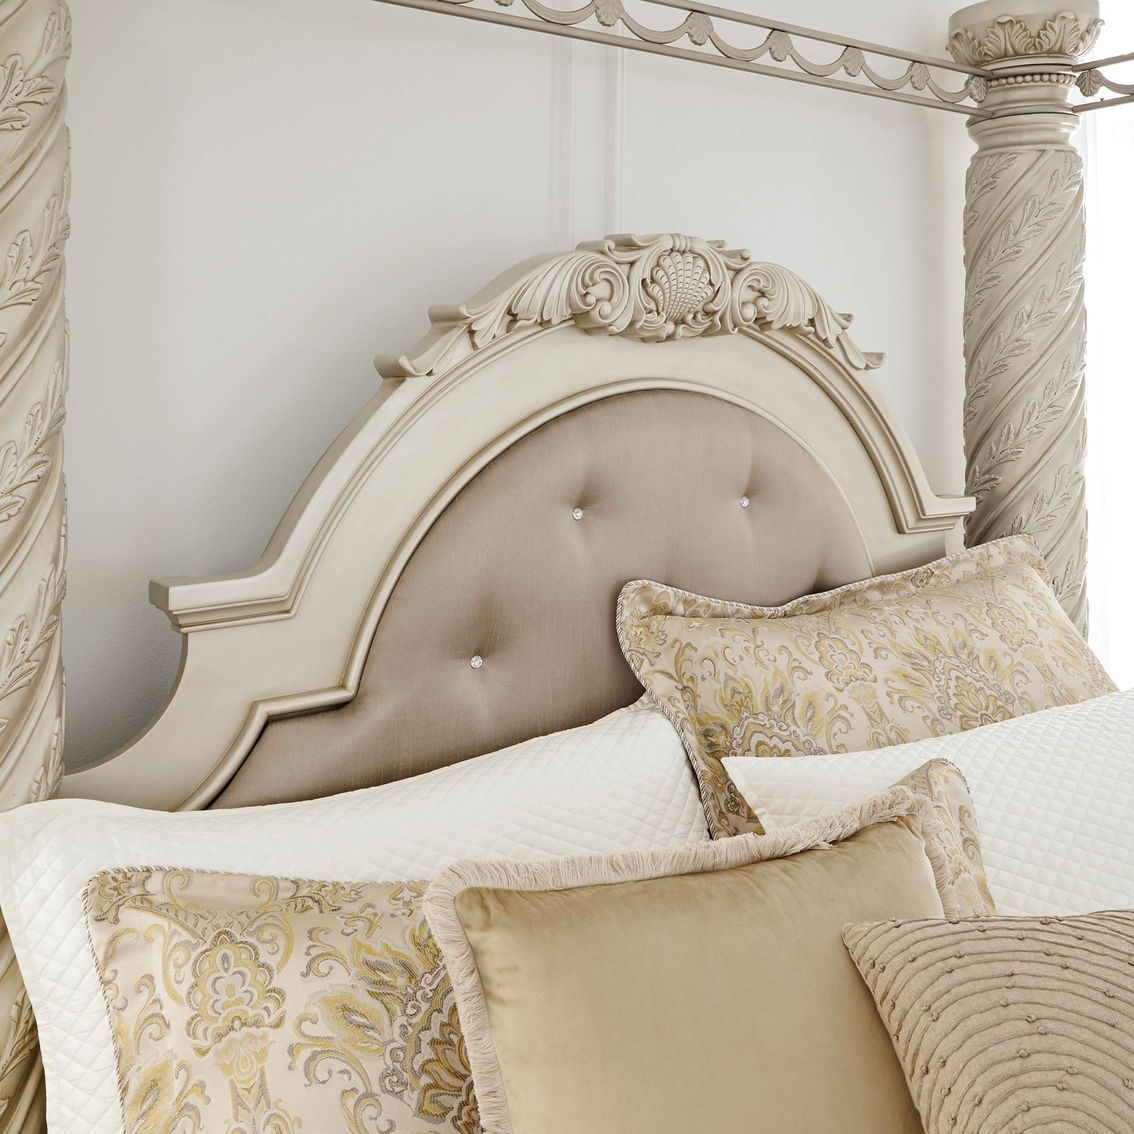 Signature Design by Ashley Cassimore King Canopy Bed - Image 4 of 4